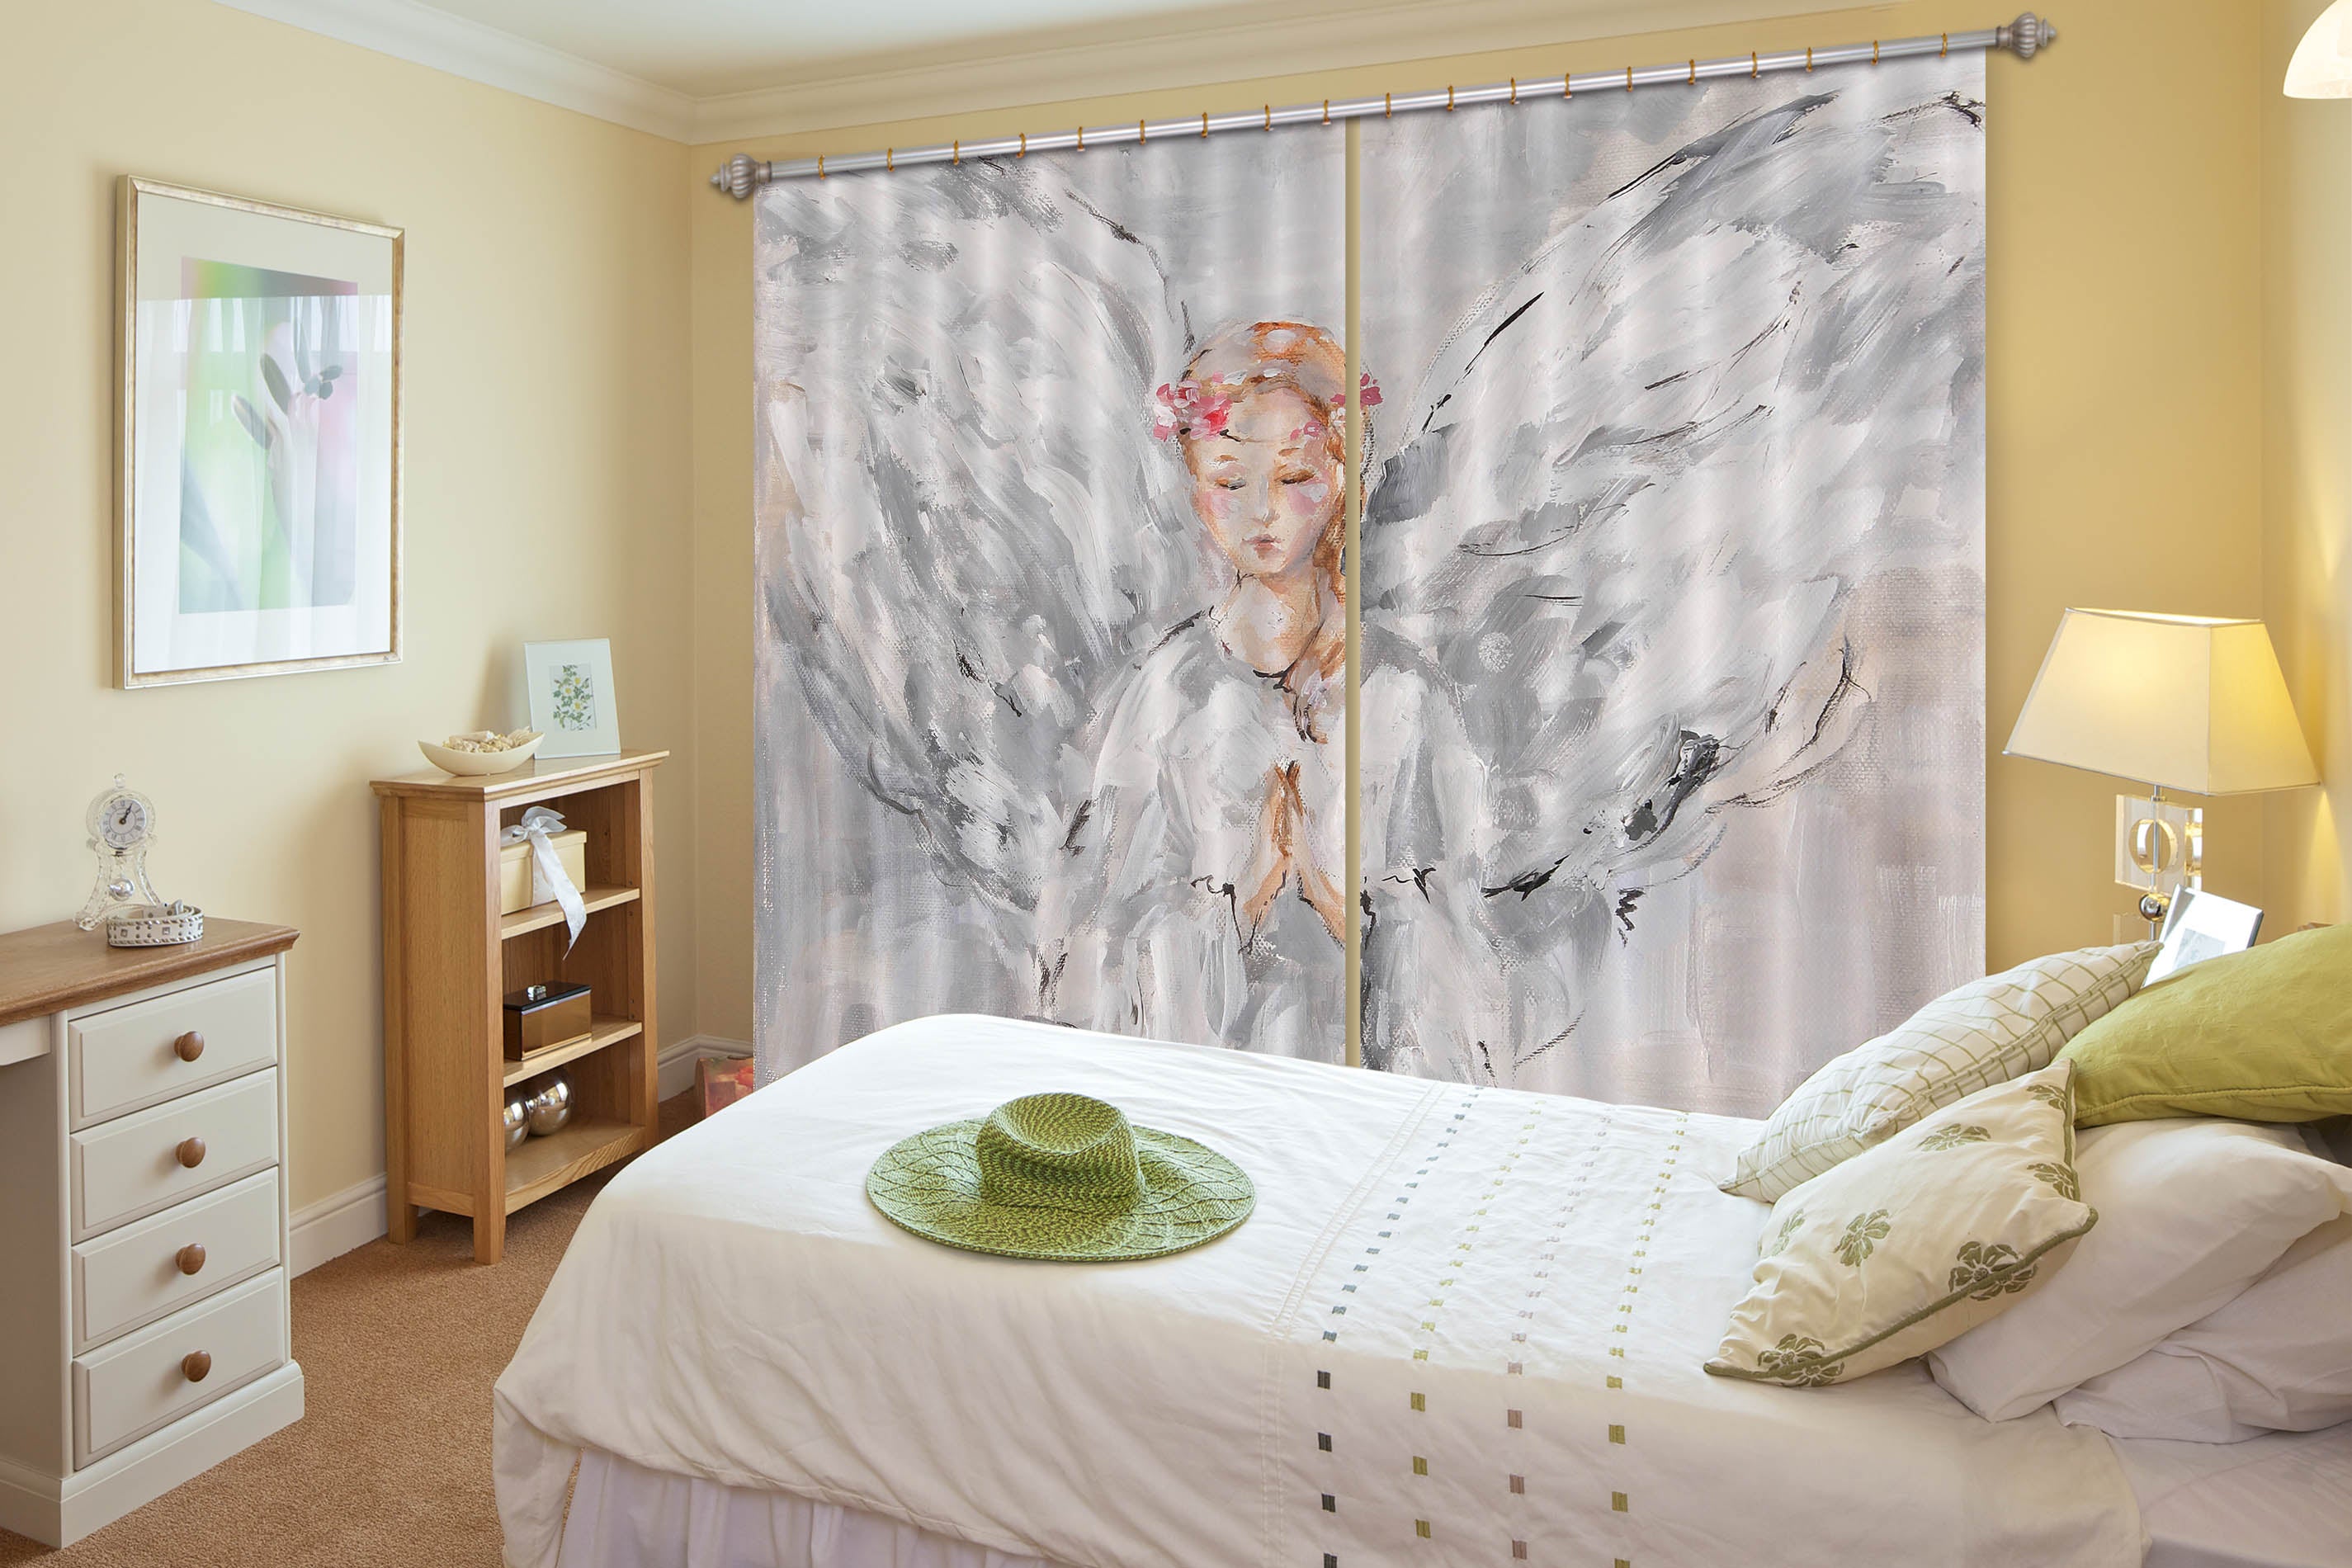 3D Angel Wings Girl 3036 Debi Coules Curtain Curtains Drapes